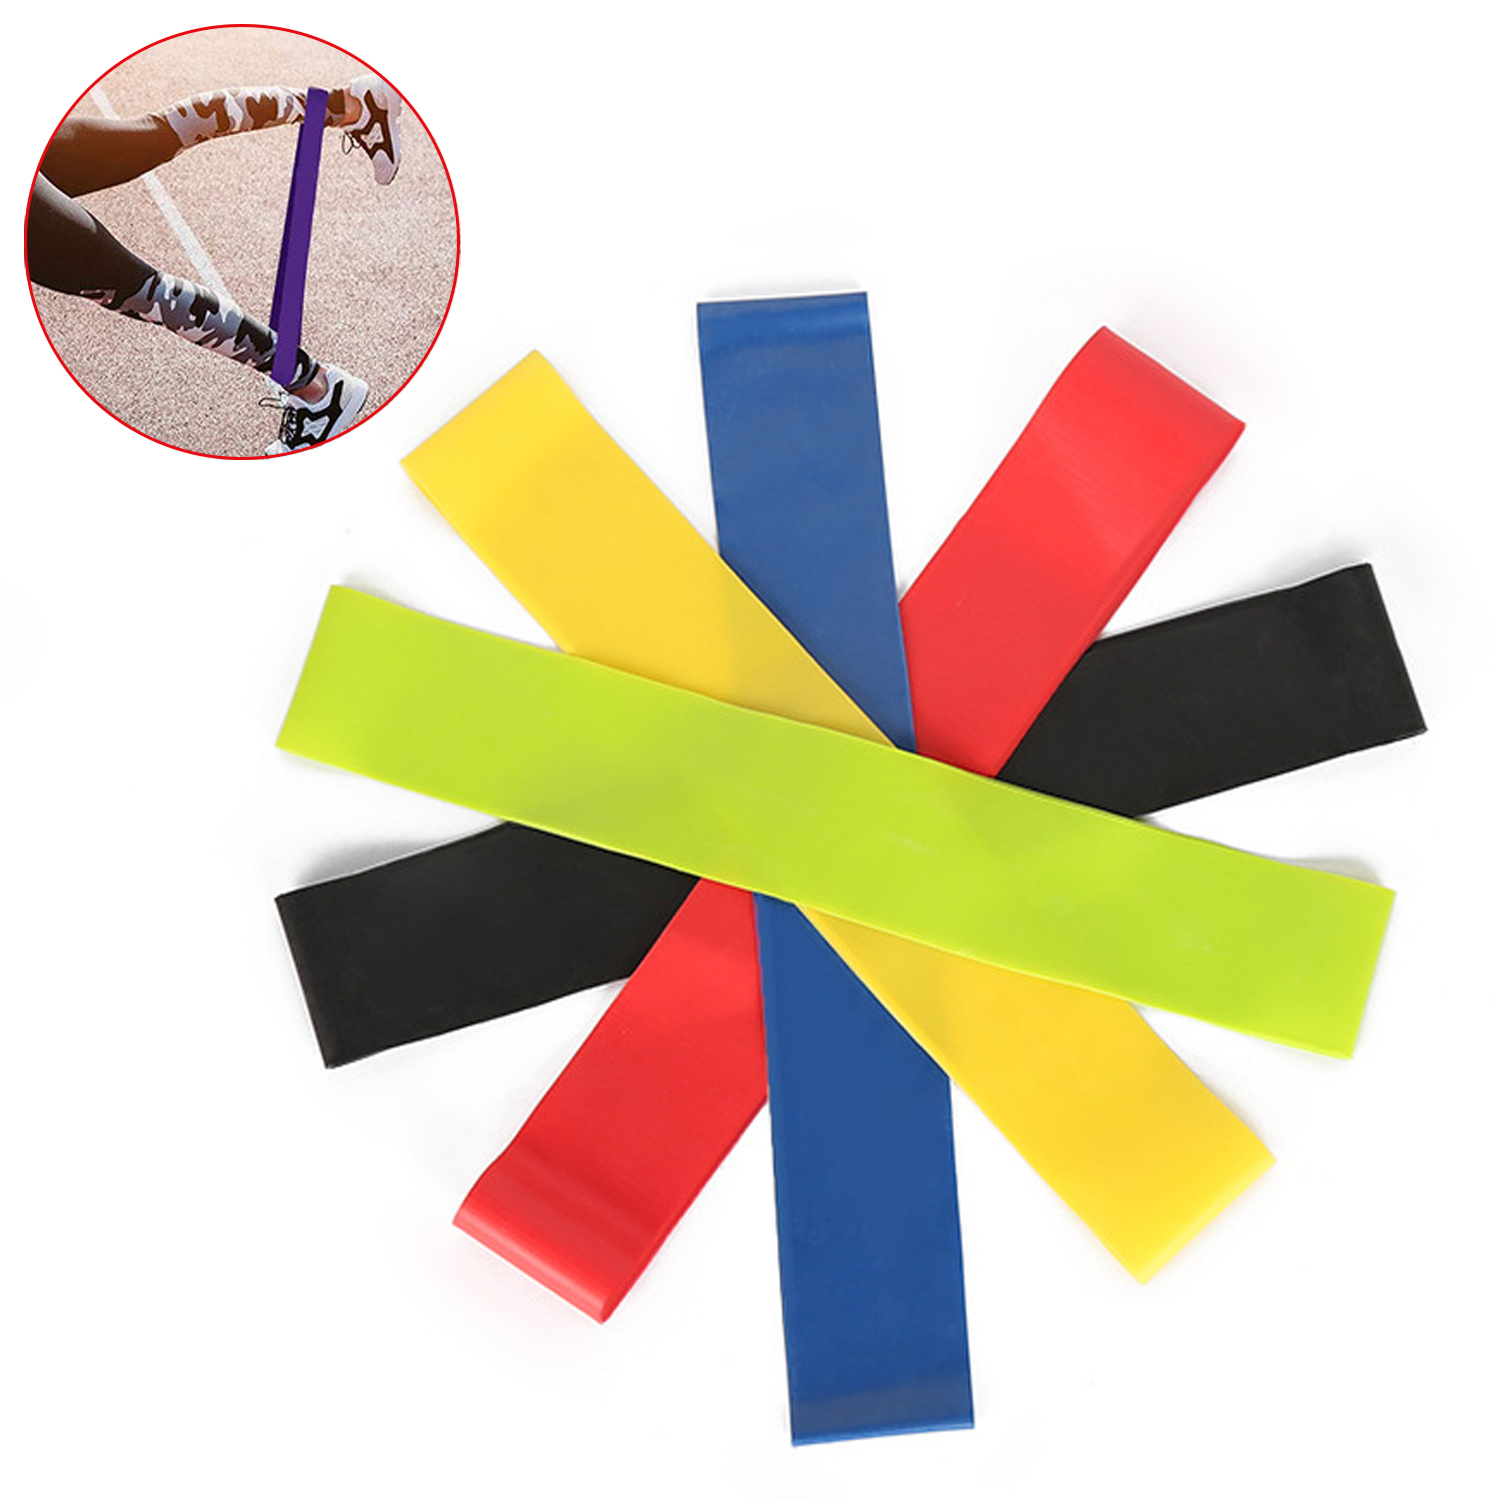 5 Pcs Ring Shape Latex Resistance Bands Yoga Gym Strength Elastic Training Rubber Loops Bands